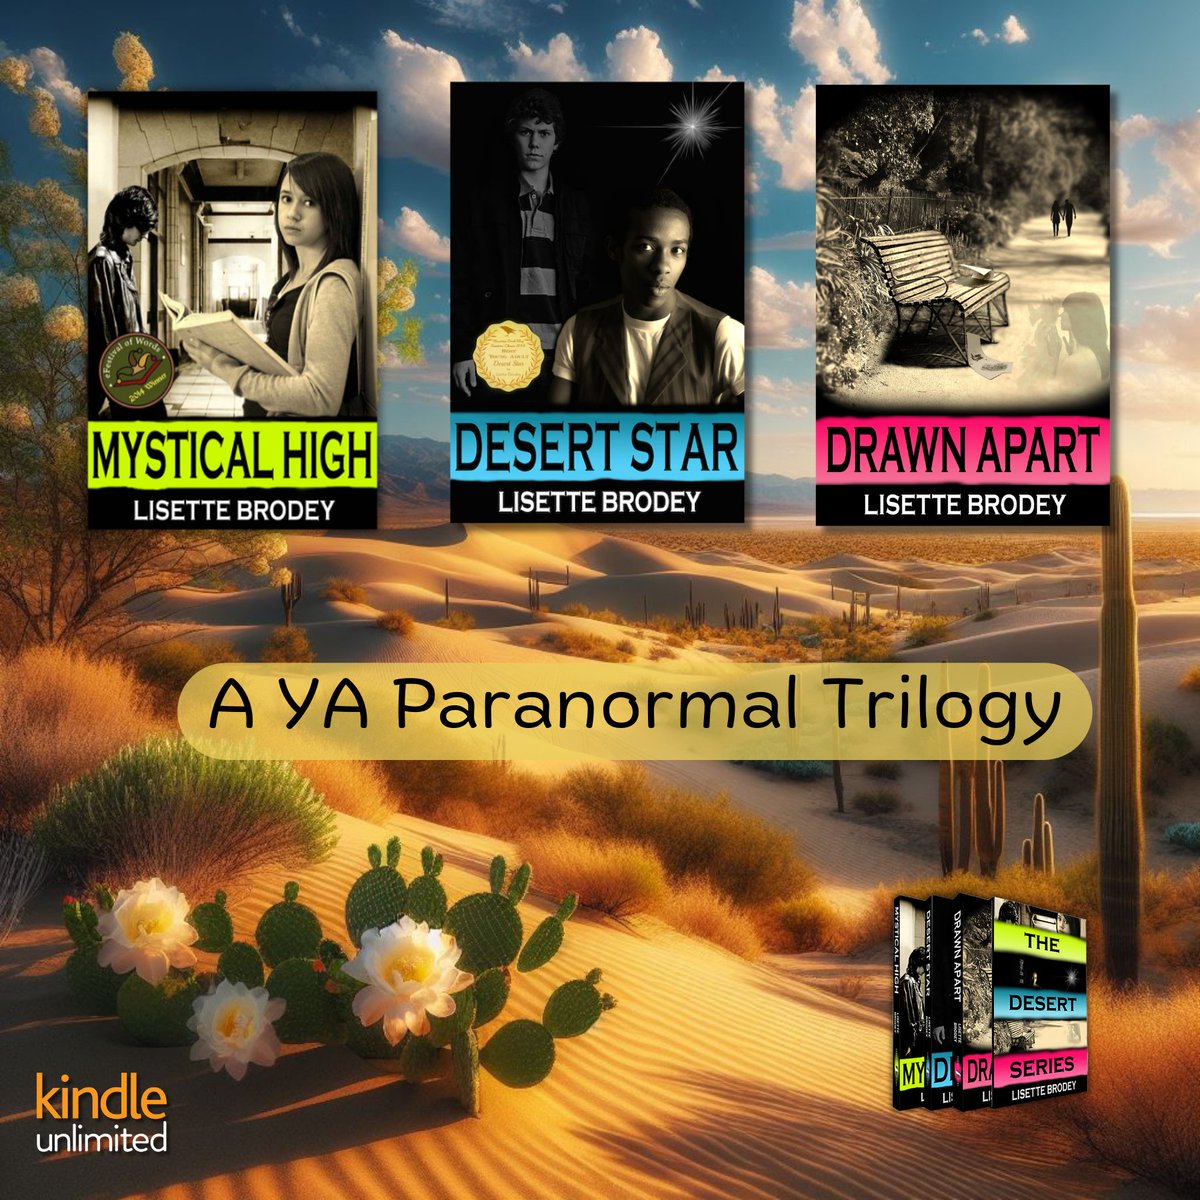 THE DESERT SERIES 🌴🌴 It all began in a dying desert town when the past came back to haunt the present. 🌵🌞 This #YA #paranormal trilogy, takes place over a span of six years in a town called Mystekal in the Southern #California desert. mybook.to/desertseries 📚 #KU